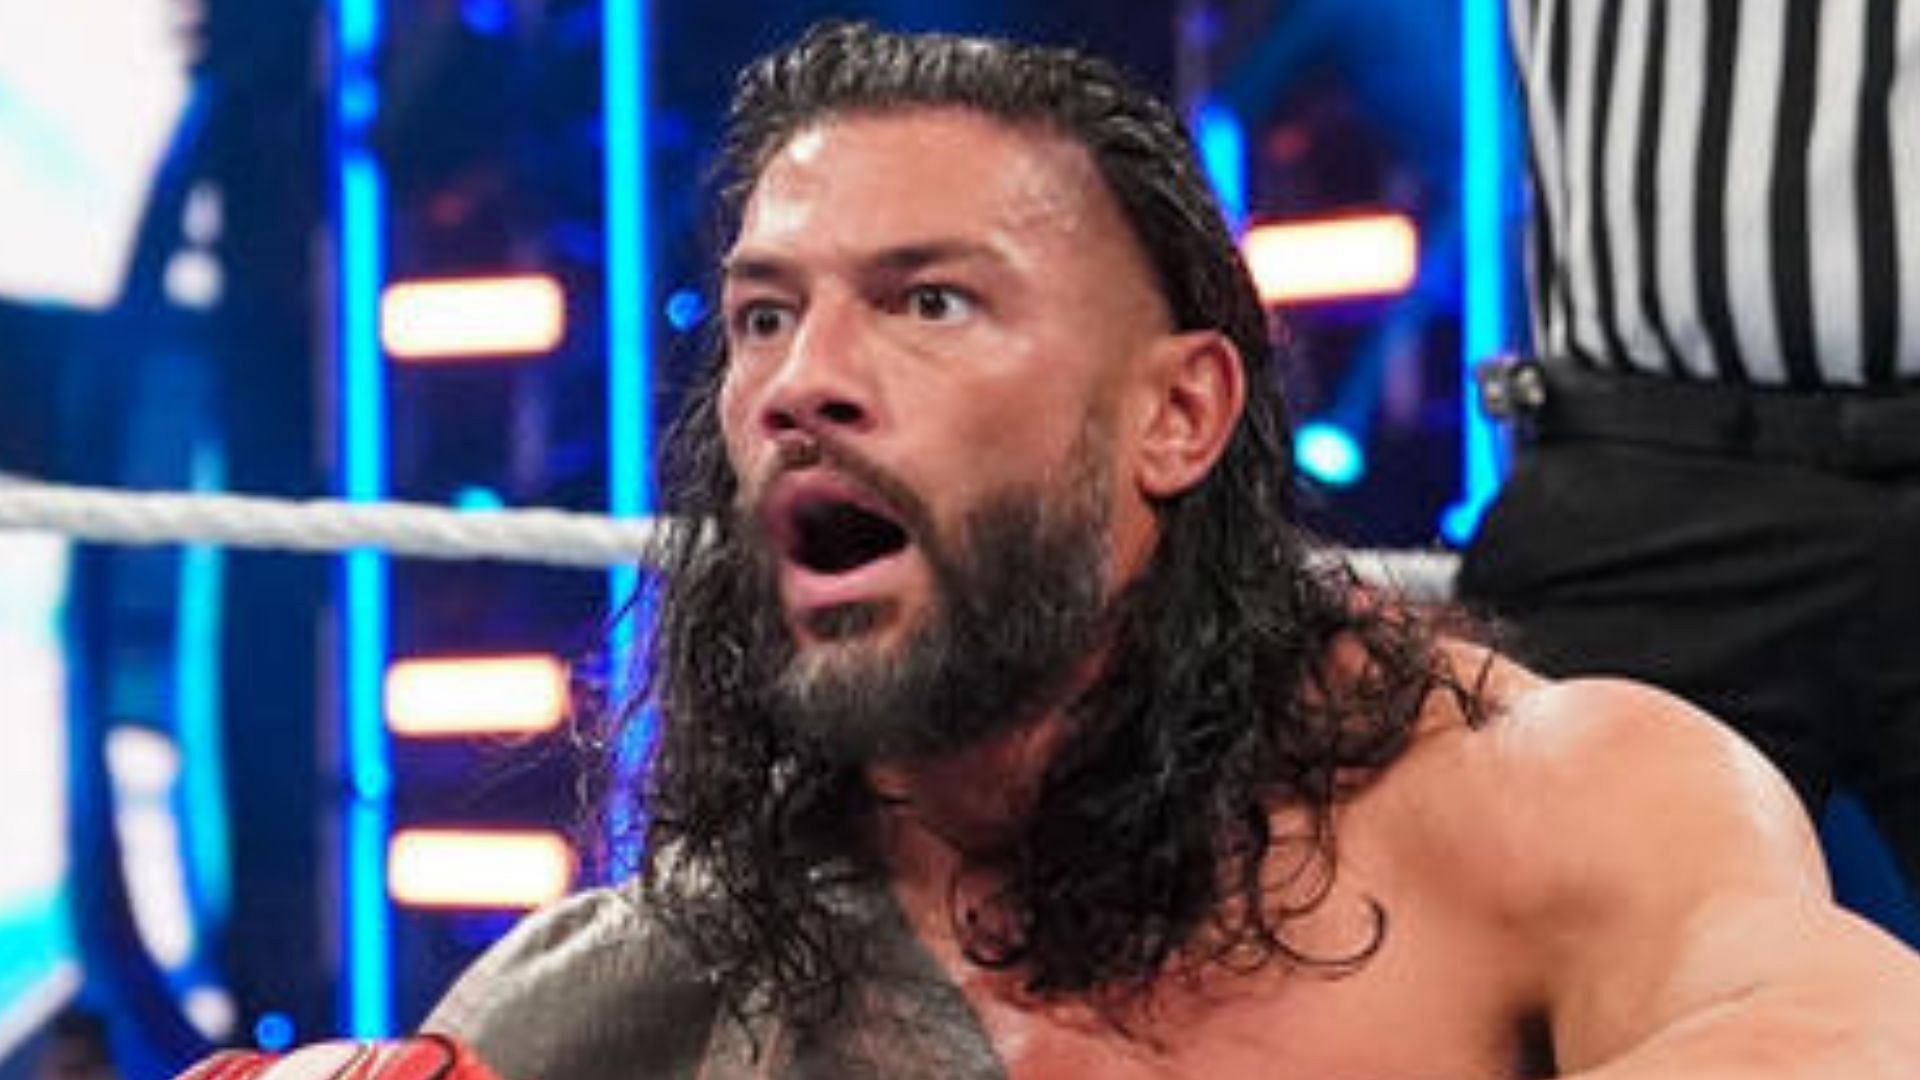 Could Roman Reigns lose his titles if WWE sign this man?